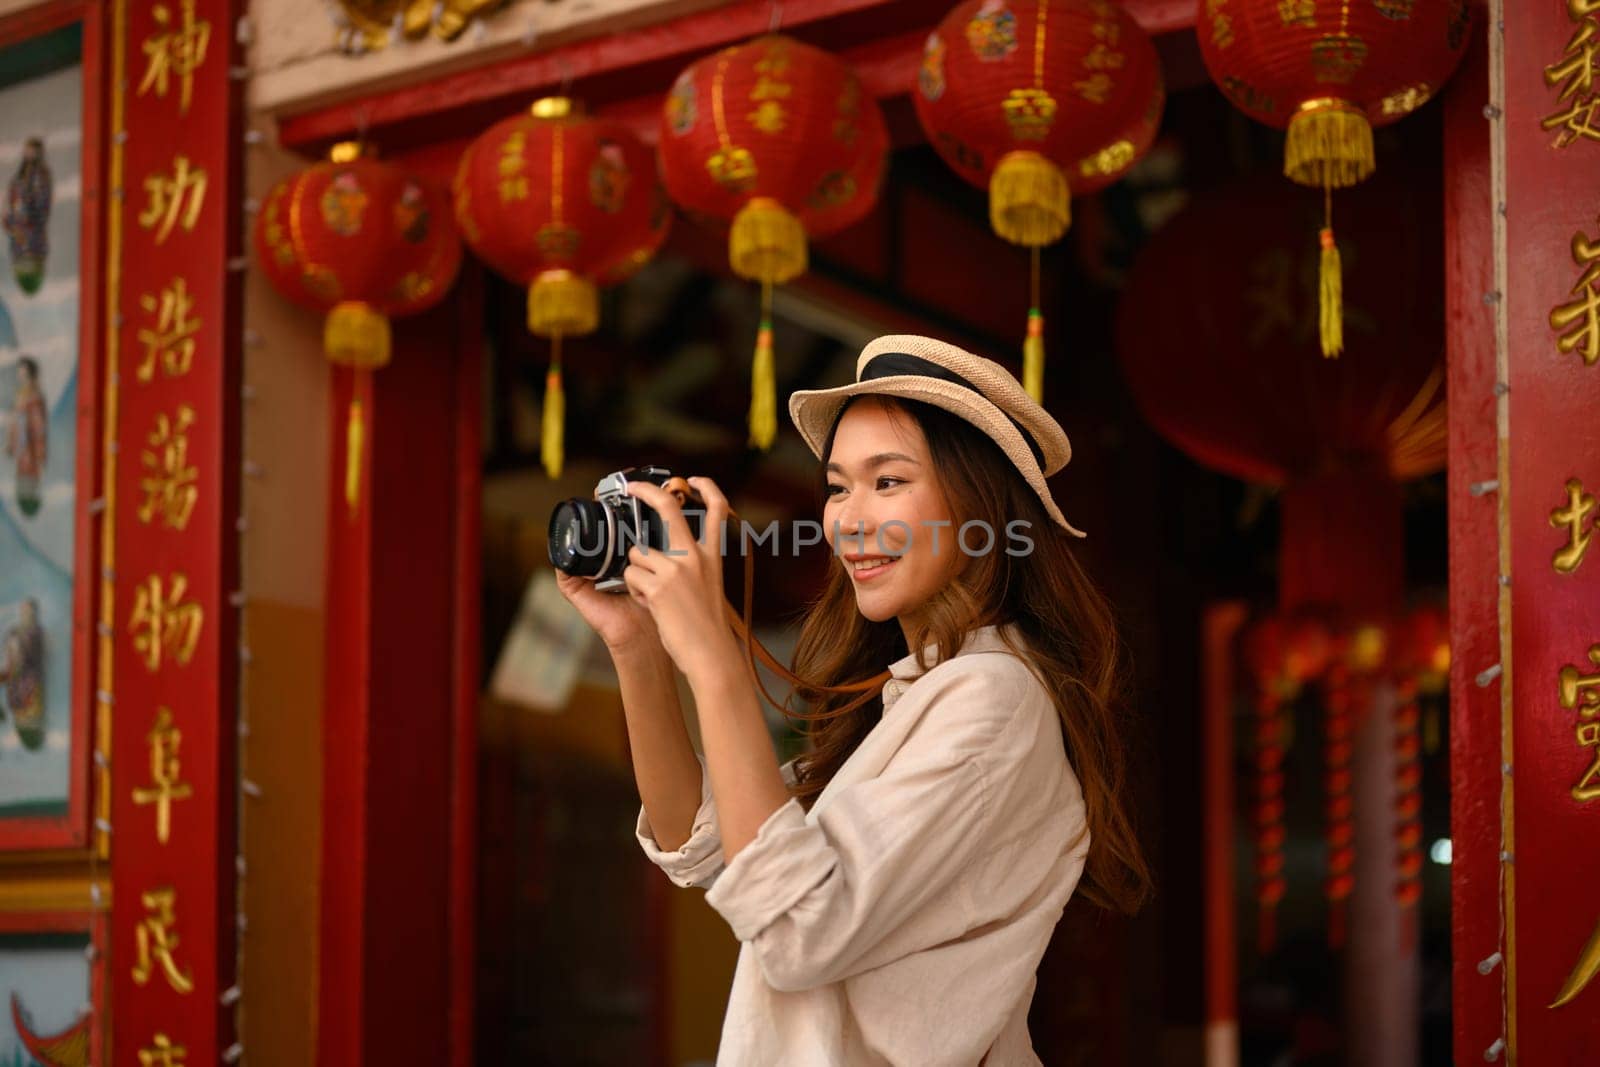 Smiling young woman standing at Chinese Temple with beautiful red lanterns adorning, taking photo with camera by prathanchorruangsak